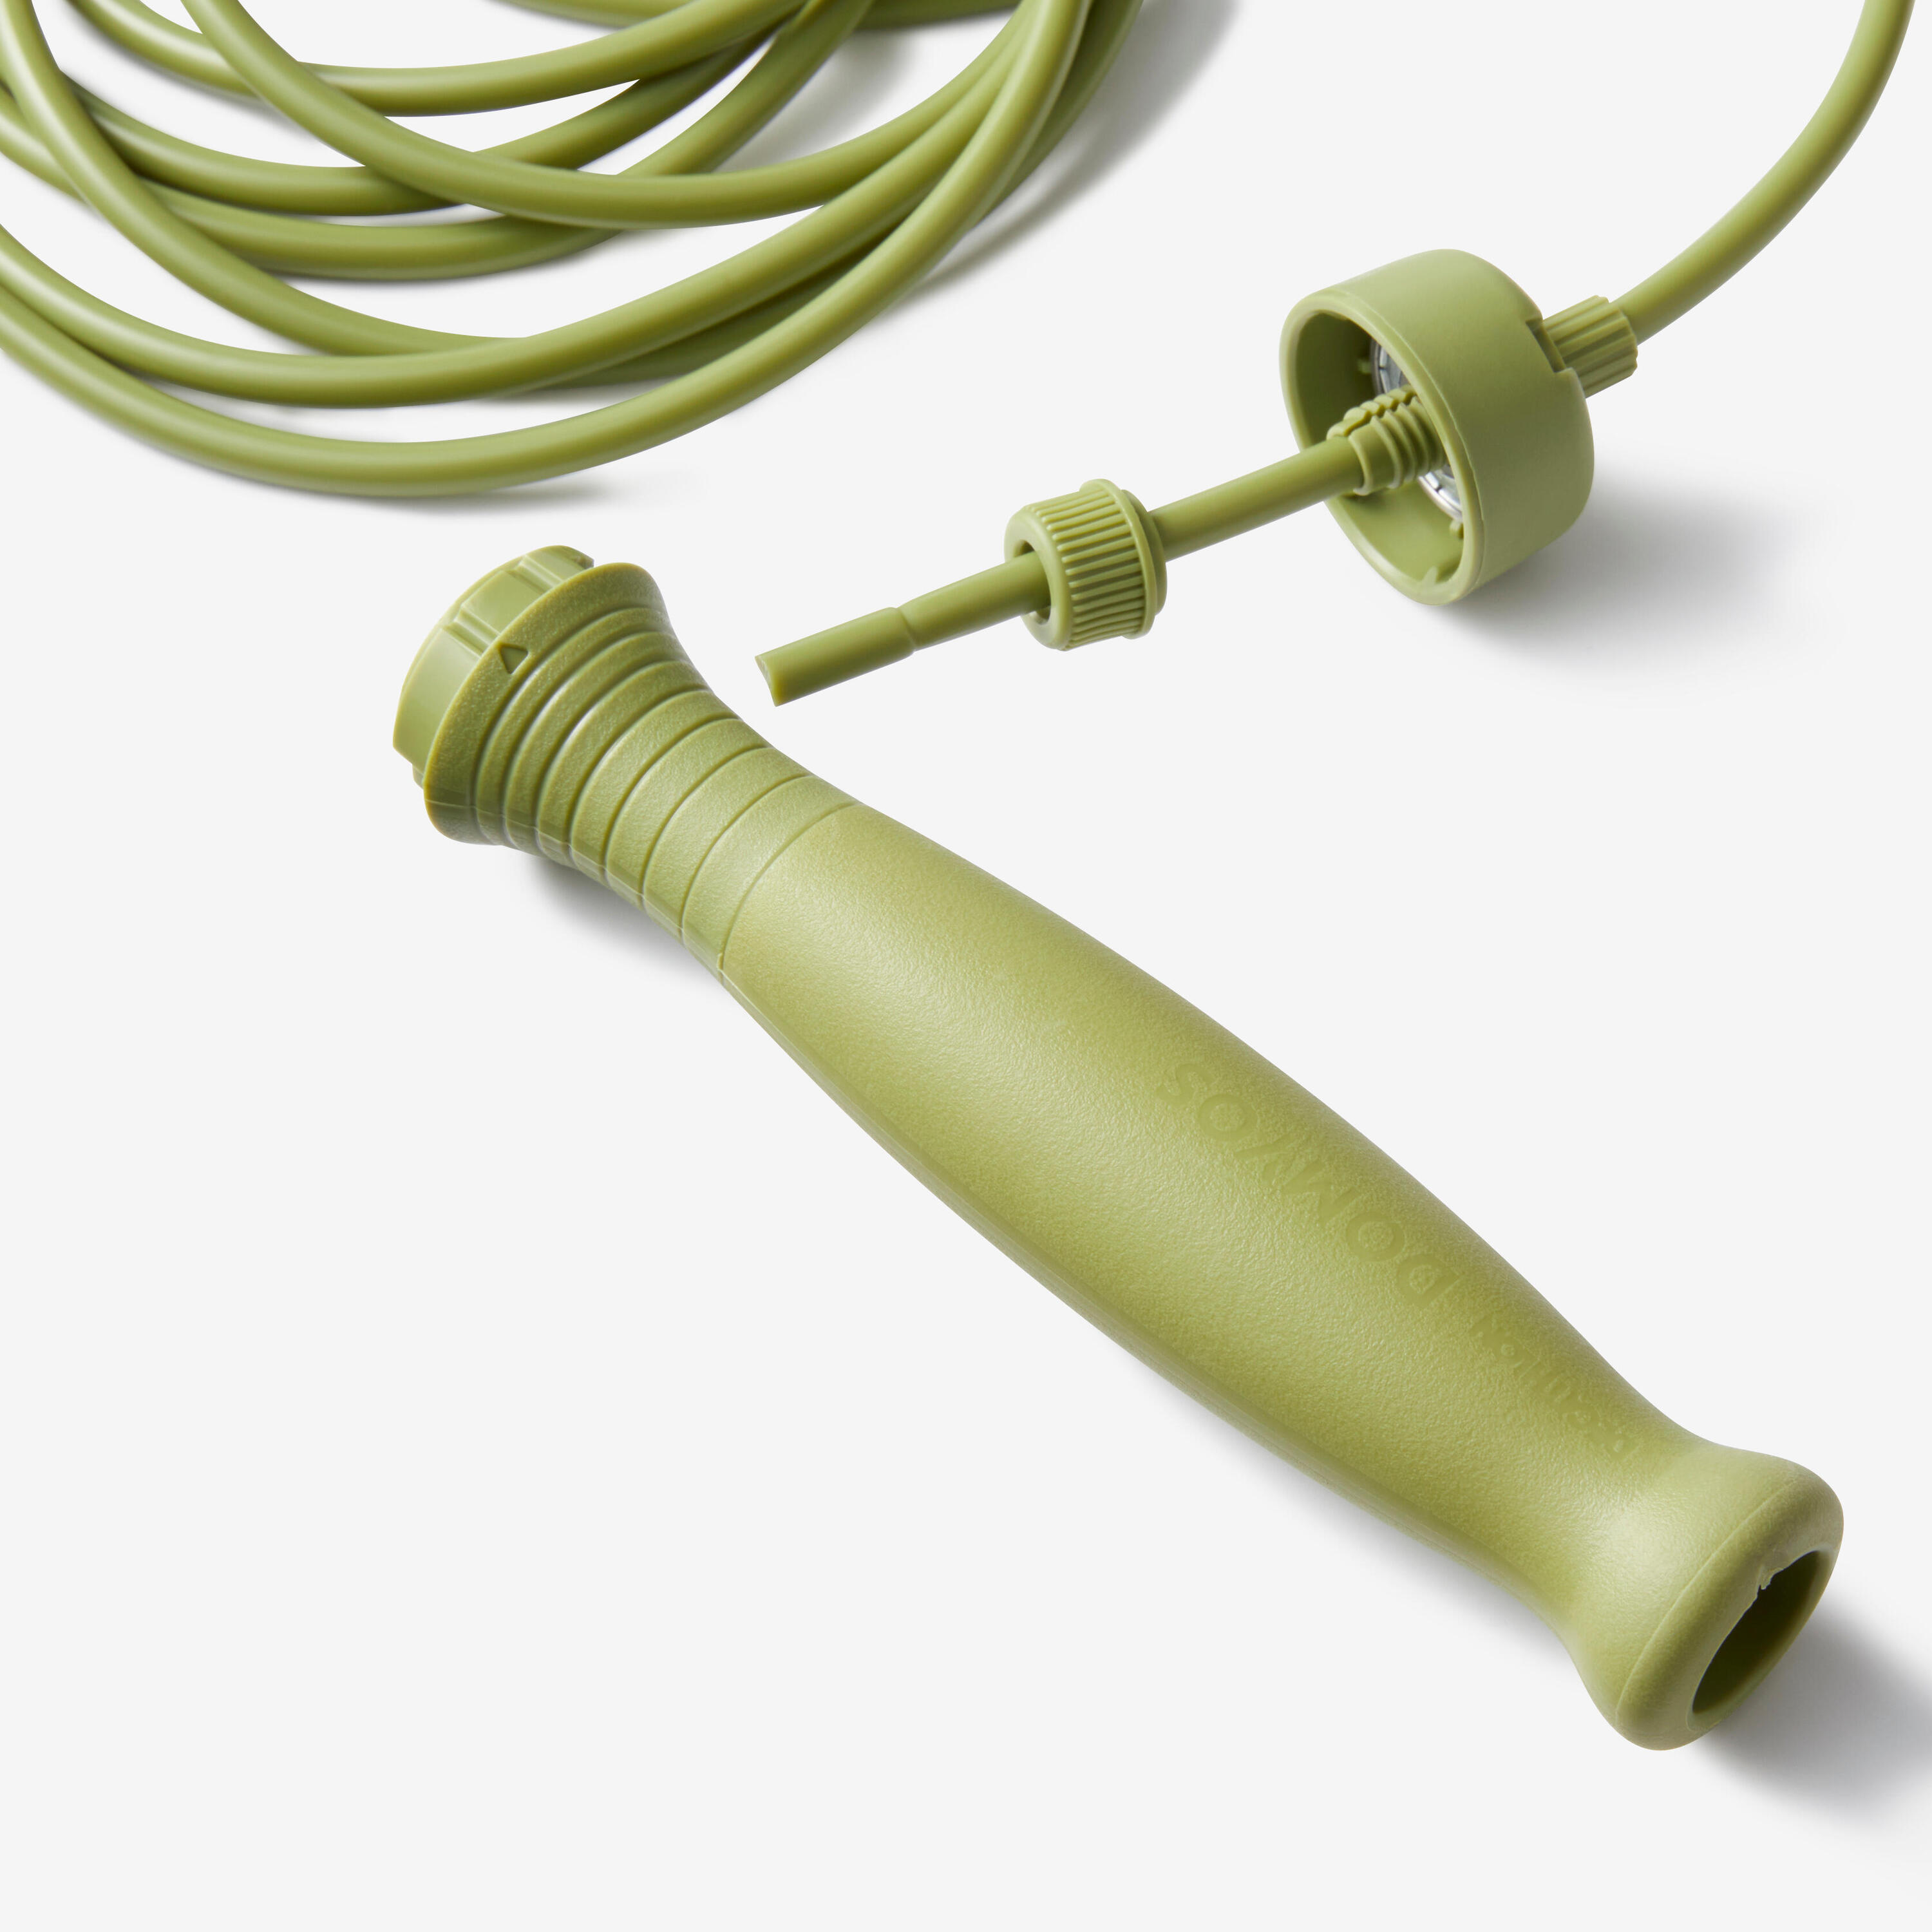 Jump Rope with Rubber Handles 3 m Adjustable Length - Green 4/7